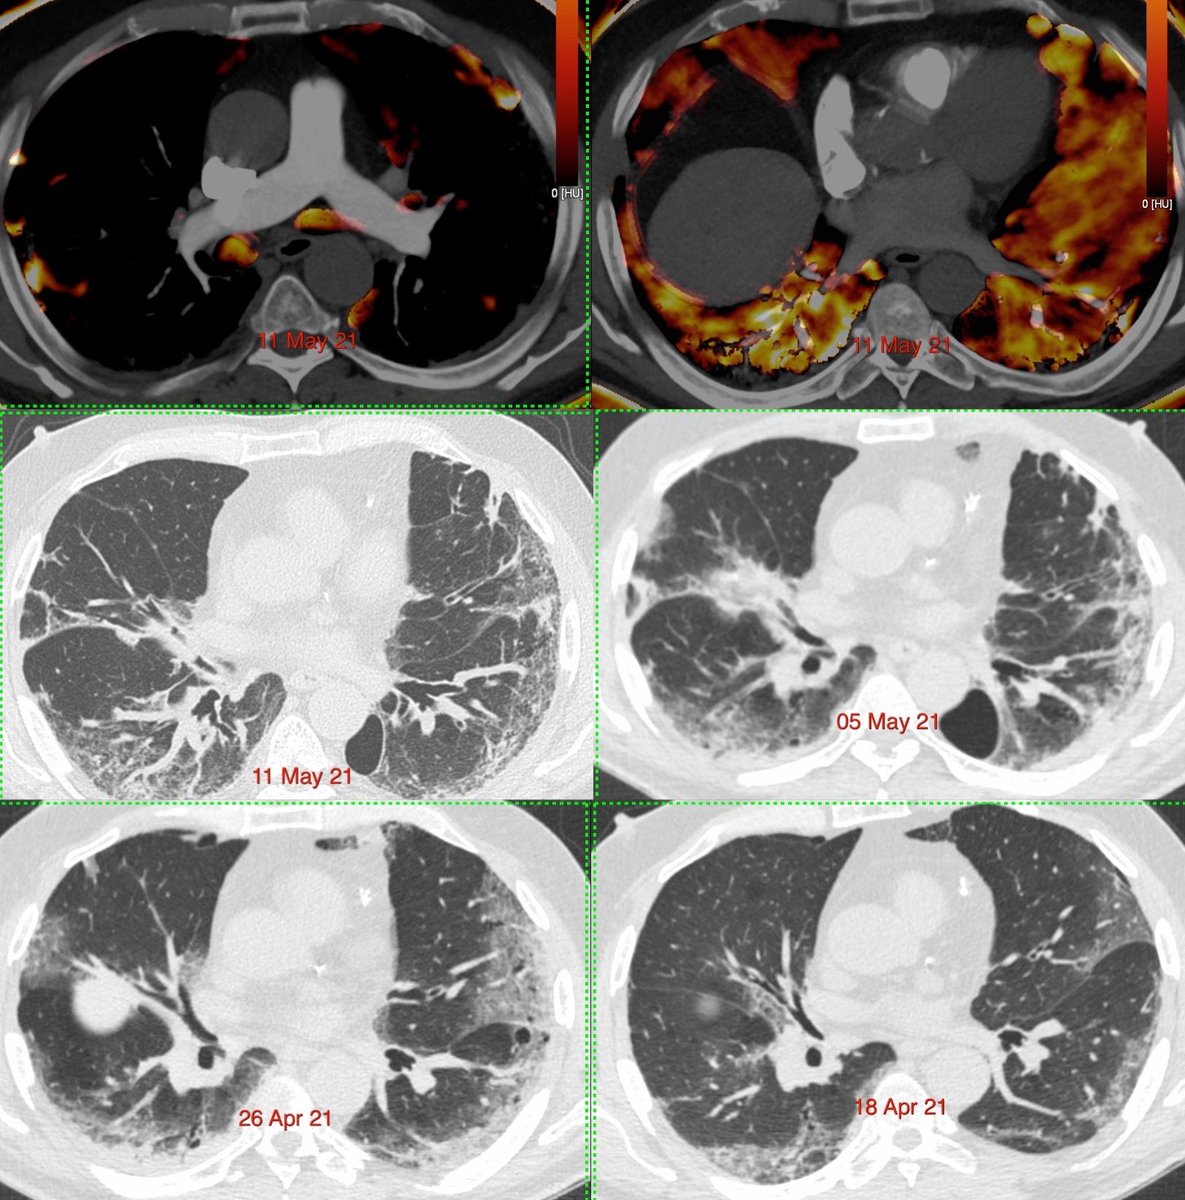 Case: Covid-19 angiopathy with perfusion defects without pulmonary thromboembolism
ctchestreview.com/covid19fibrosi…
#covid19 #covidangiopathy #ctpa #radtwitter #lungtwitter